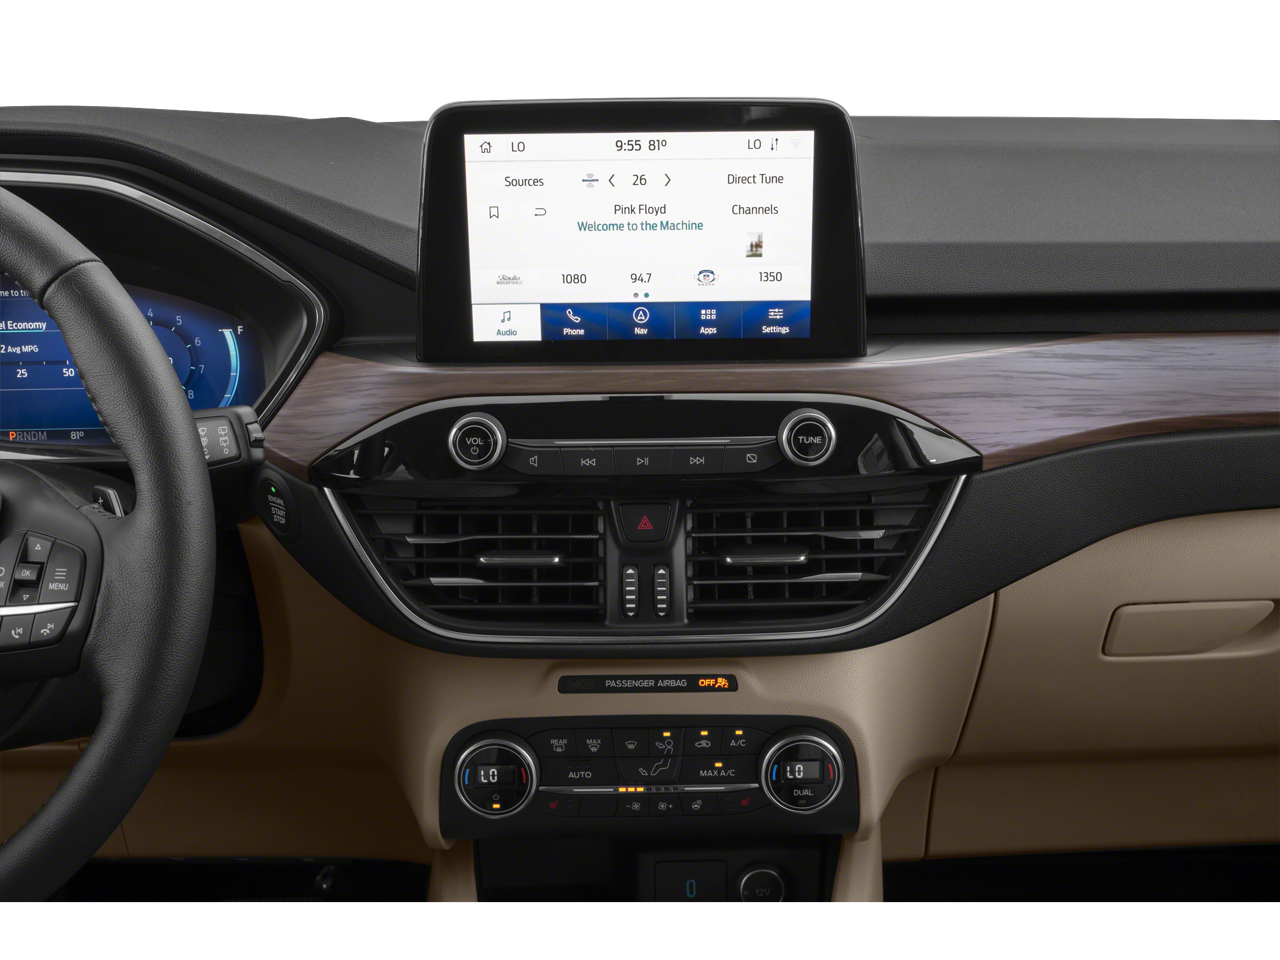 2022 Ford Escape Titanium Sync 3 communications and entertainment system Na